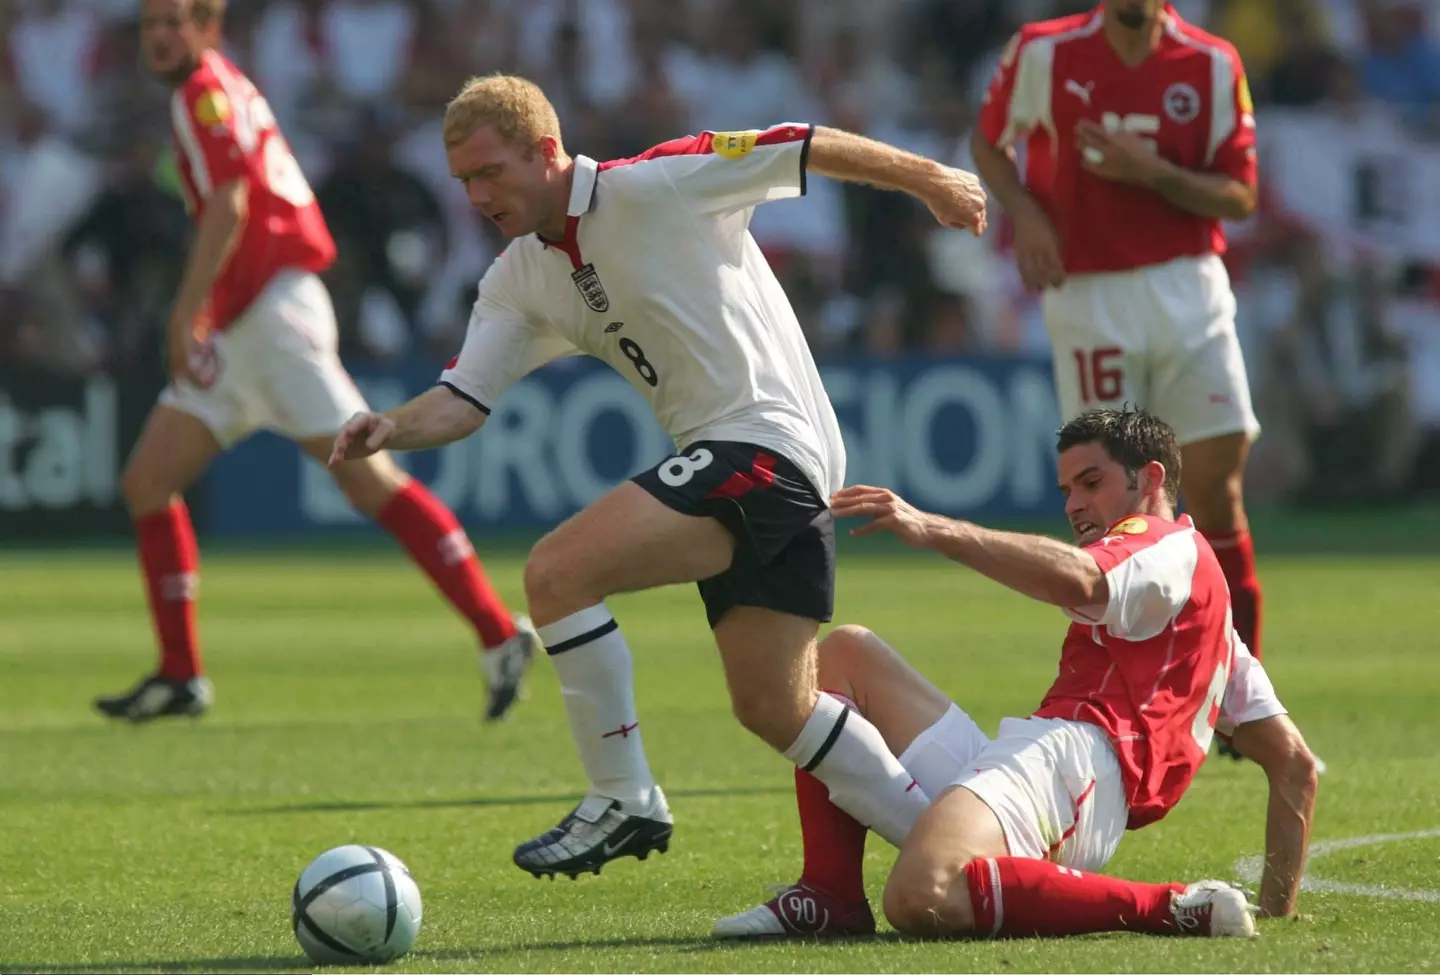 Scholes at Euro 2004, his last international tournament with England. (Image